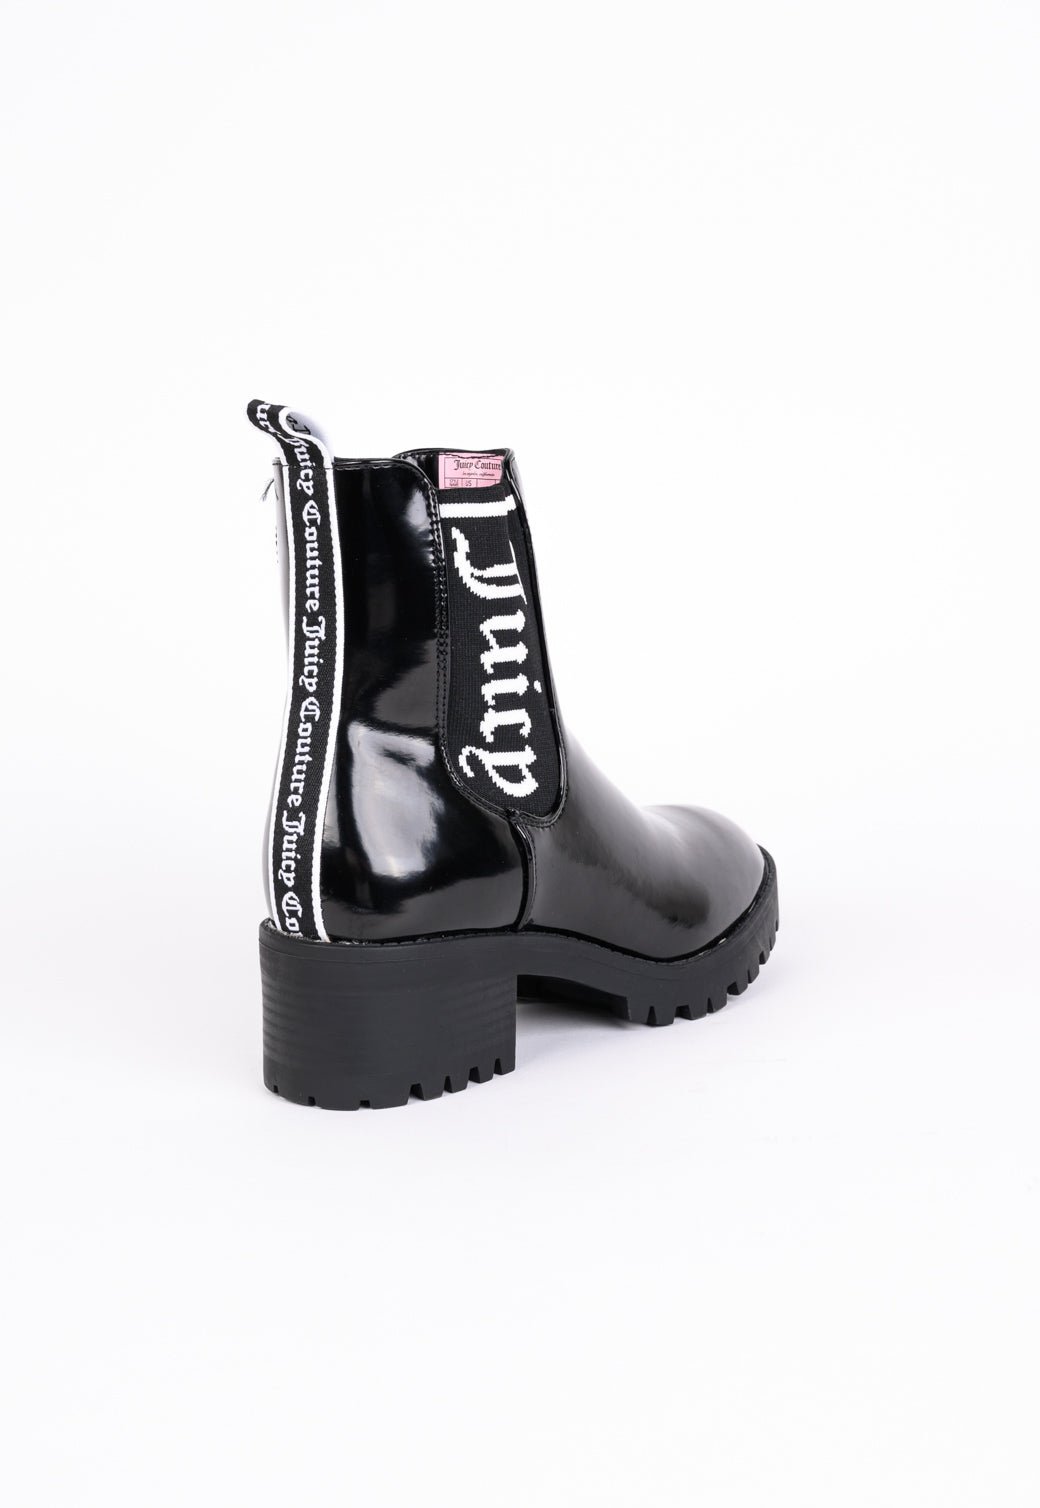 JC-ONE UP BLACK - Juicy Couture